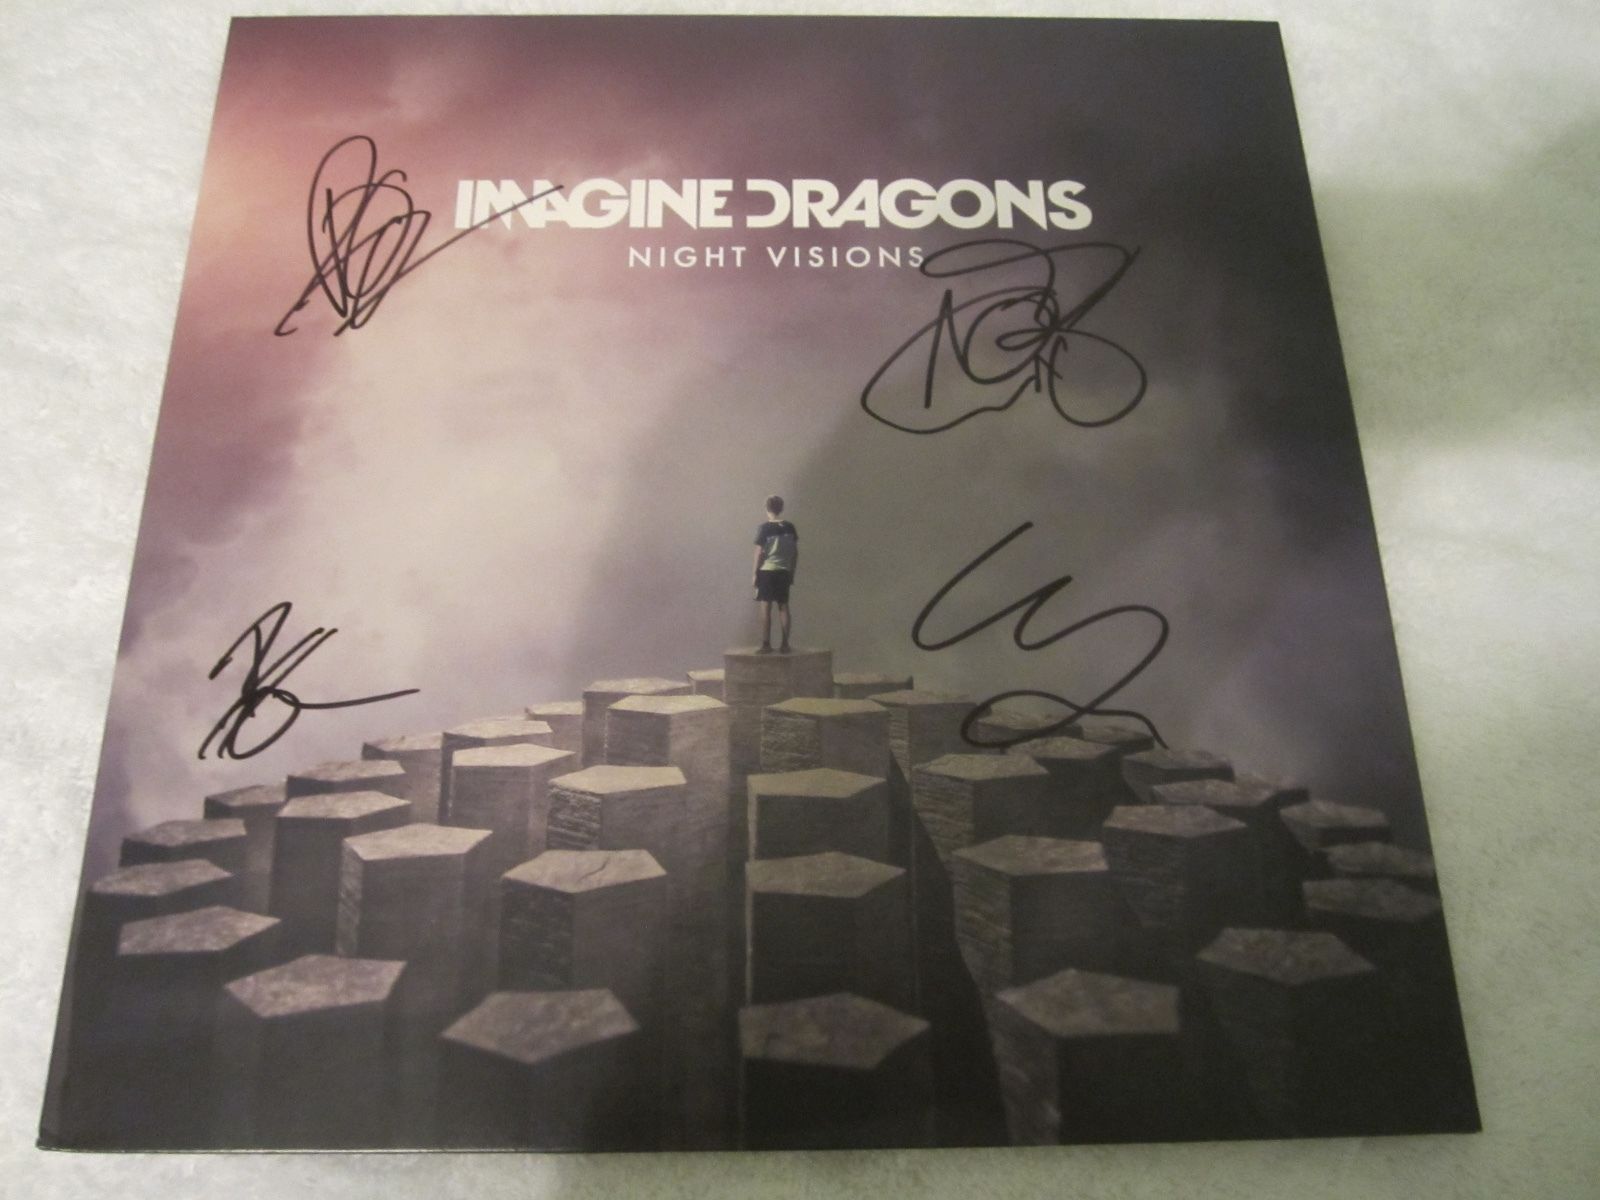  IMAGINE DRAGONS NIGHT VISIONS VINYL LP 12 SIGNED BY ALL 4  SMOKE AND MIRRORS - auction details